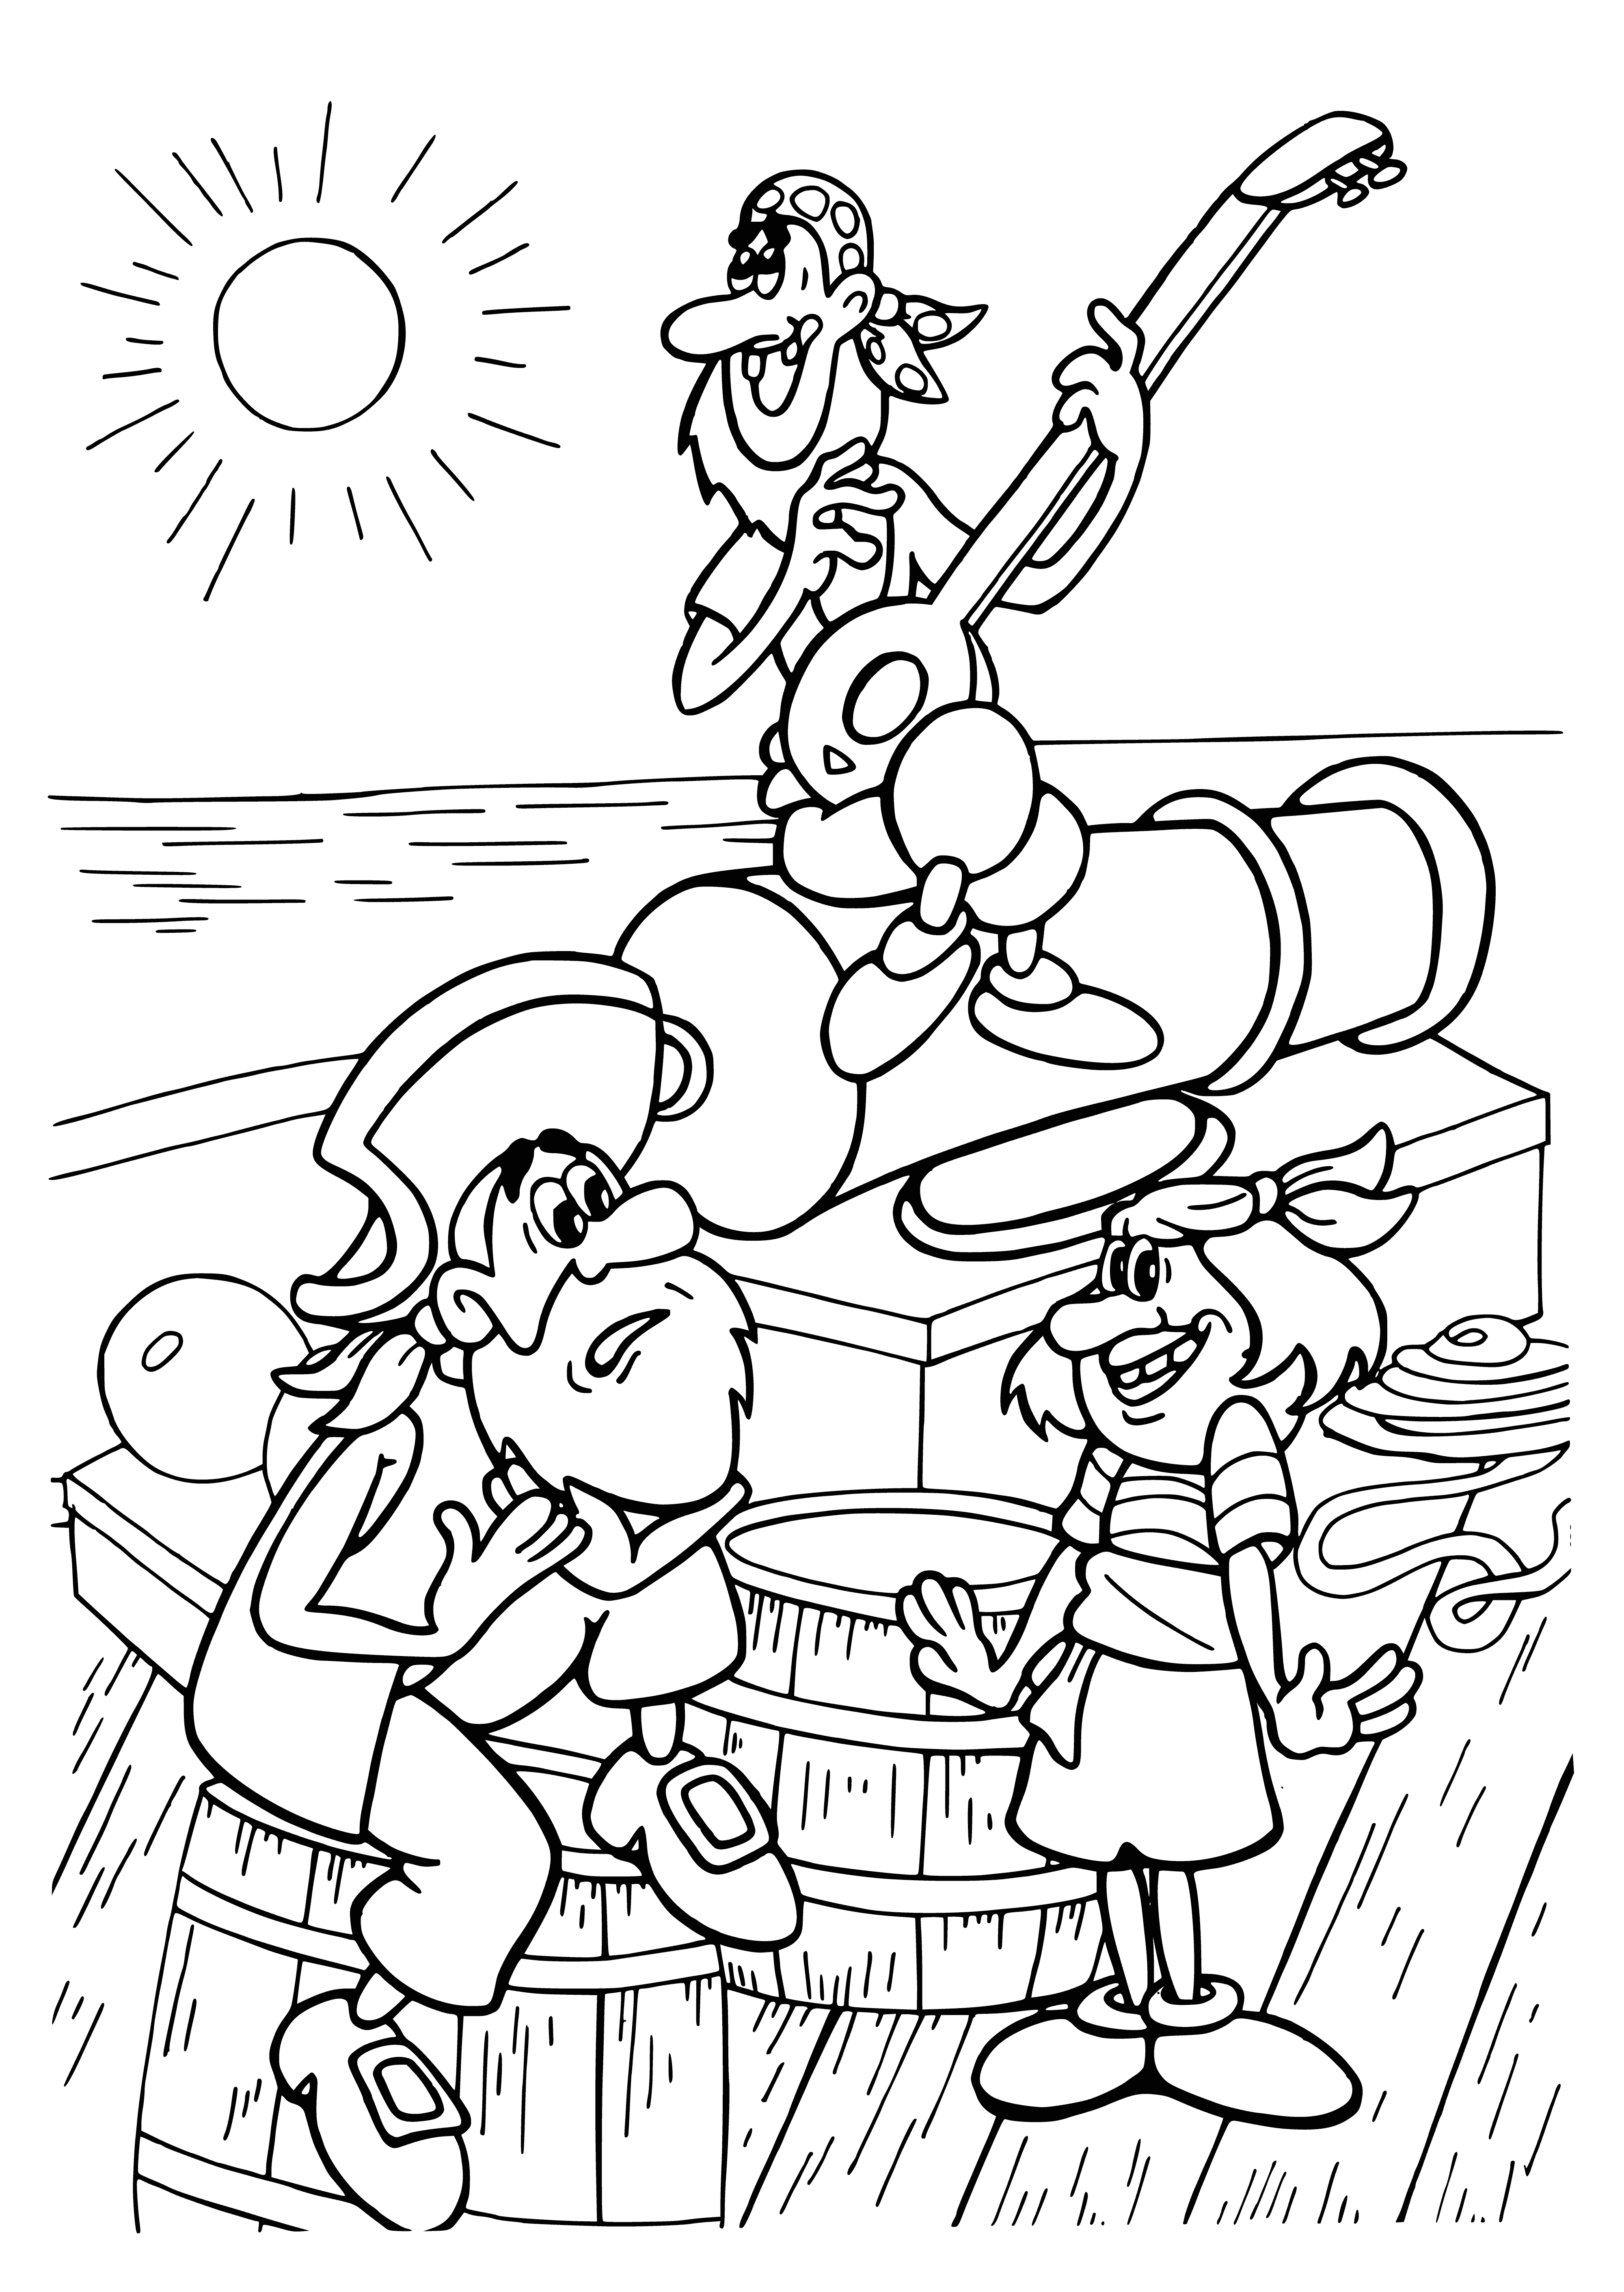 coloring page: Pirates on a ship search for treasure on a map - one has a patch over his eye. #PirateLife